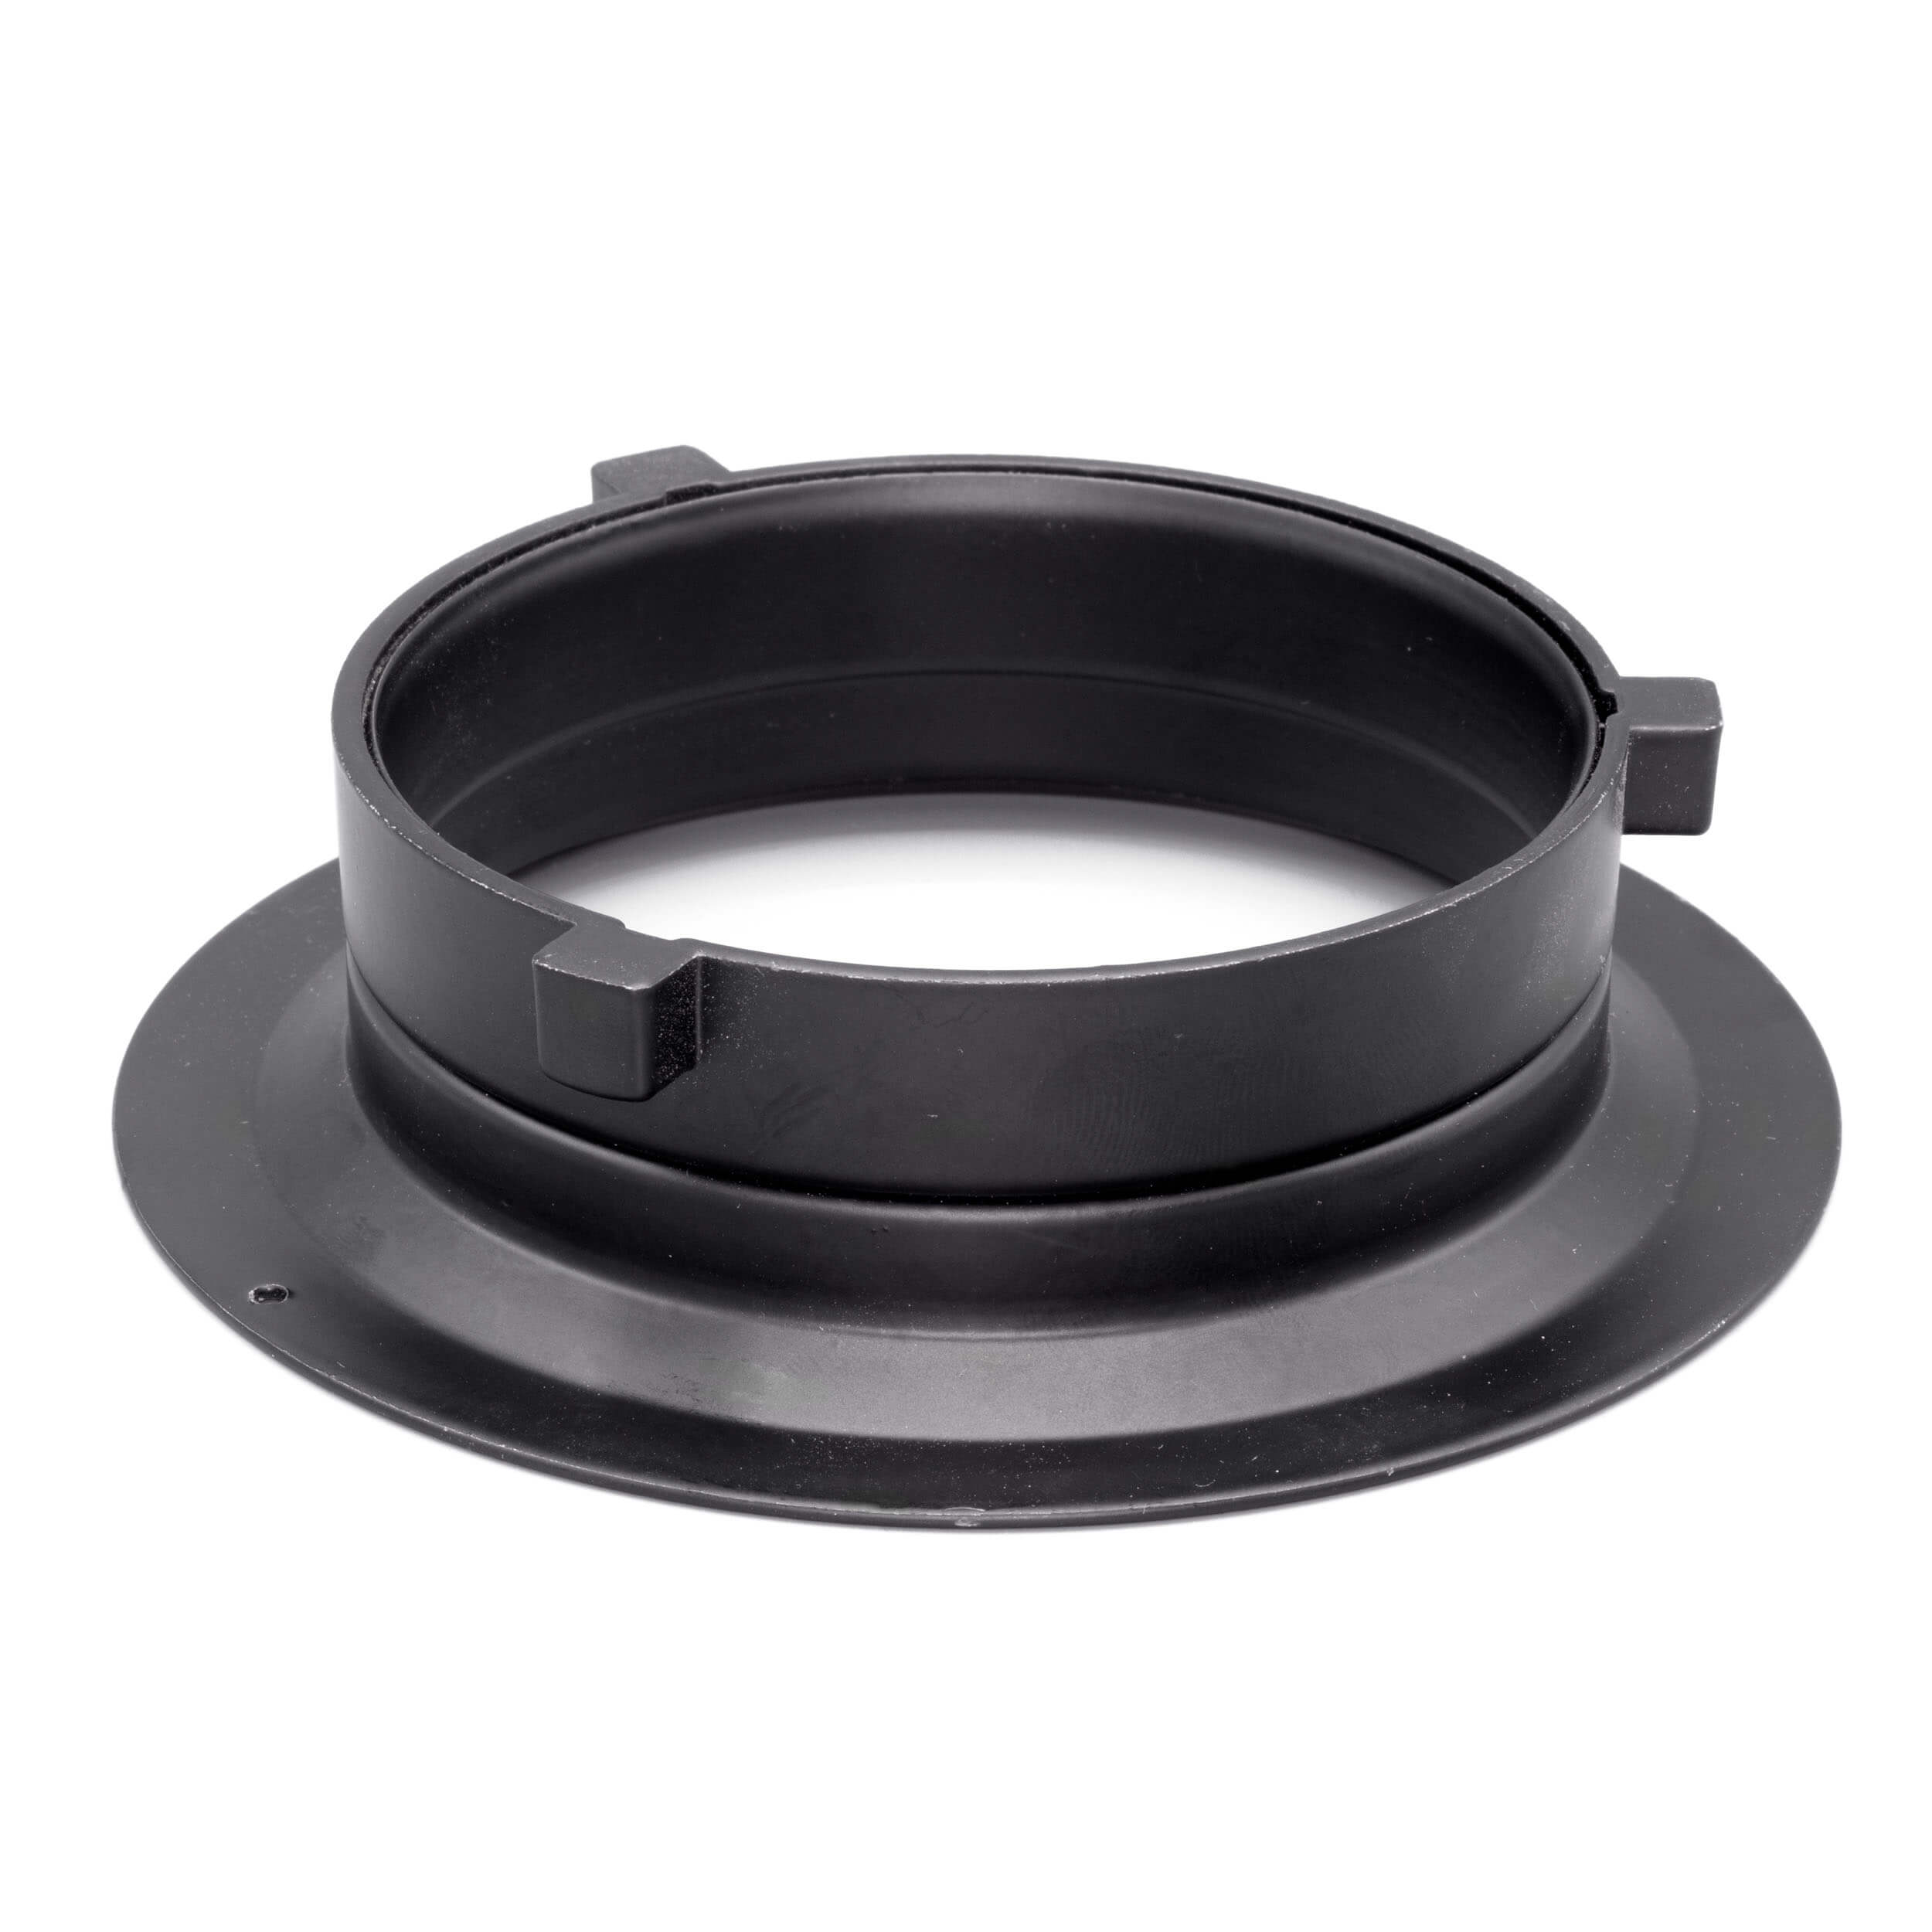 Bowens S-Type 13.5cm Adapter Ring for EF-Mount Optical Snoot - CLEARANCE